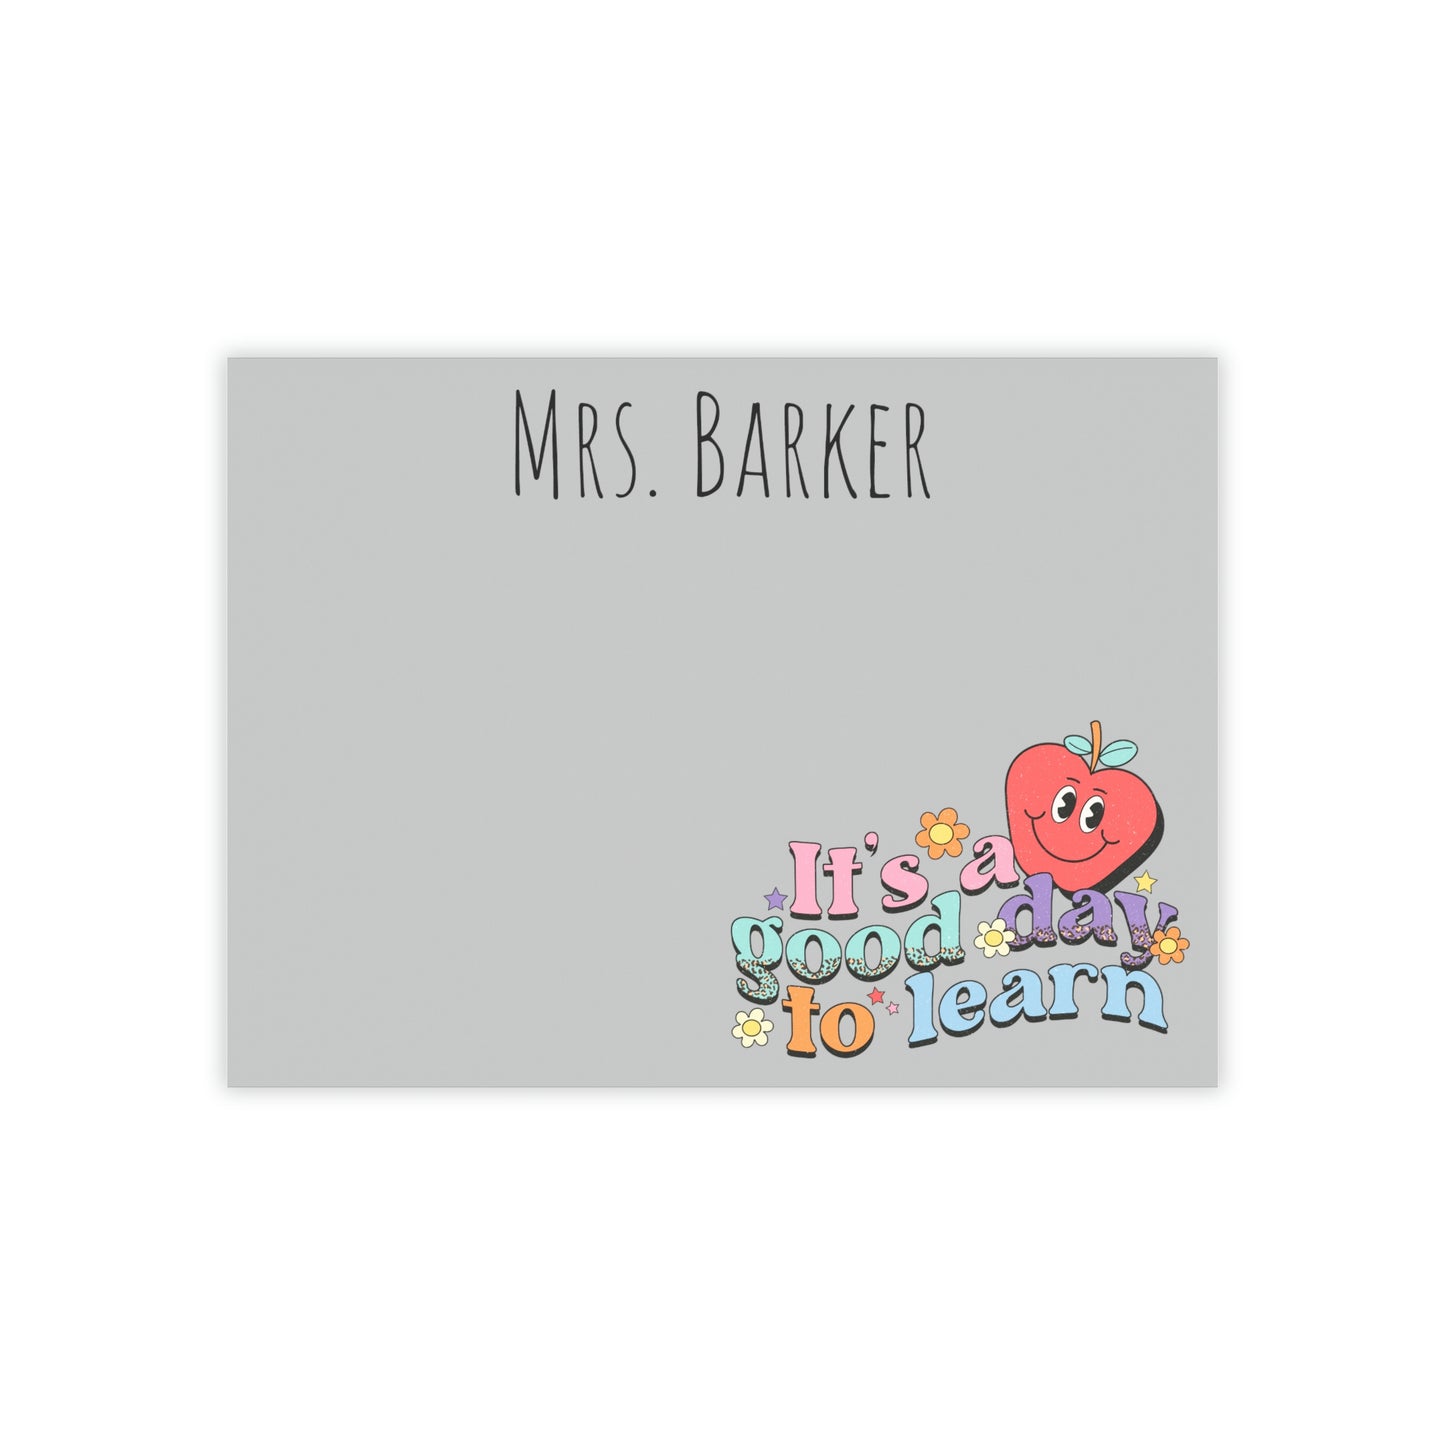 Personalized Teacher Post-it® Note Pads